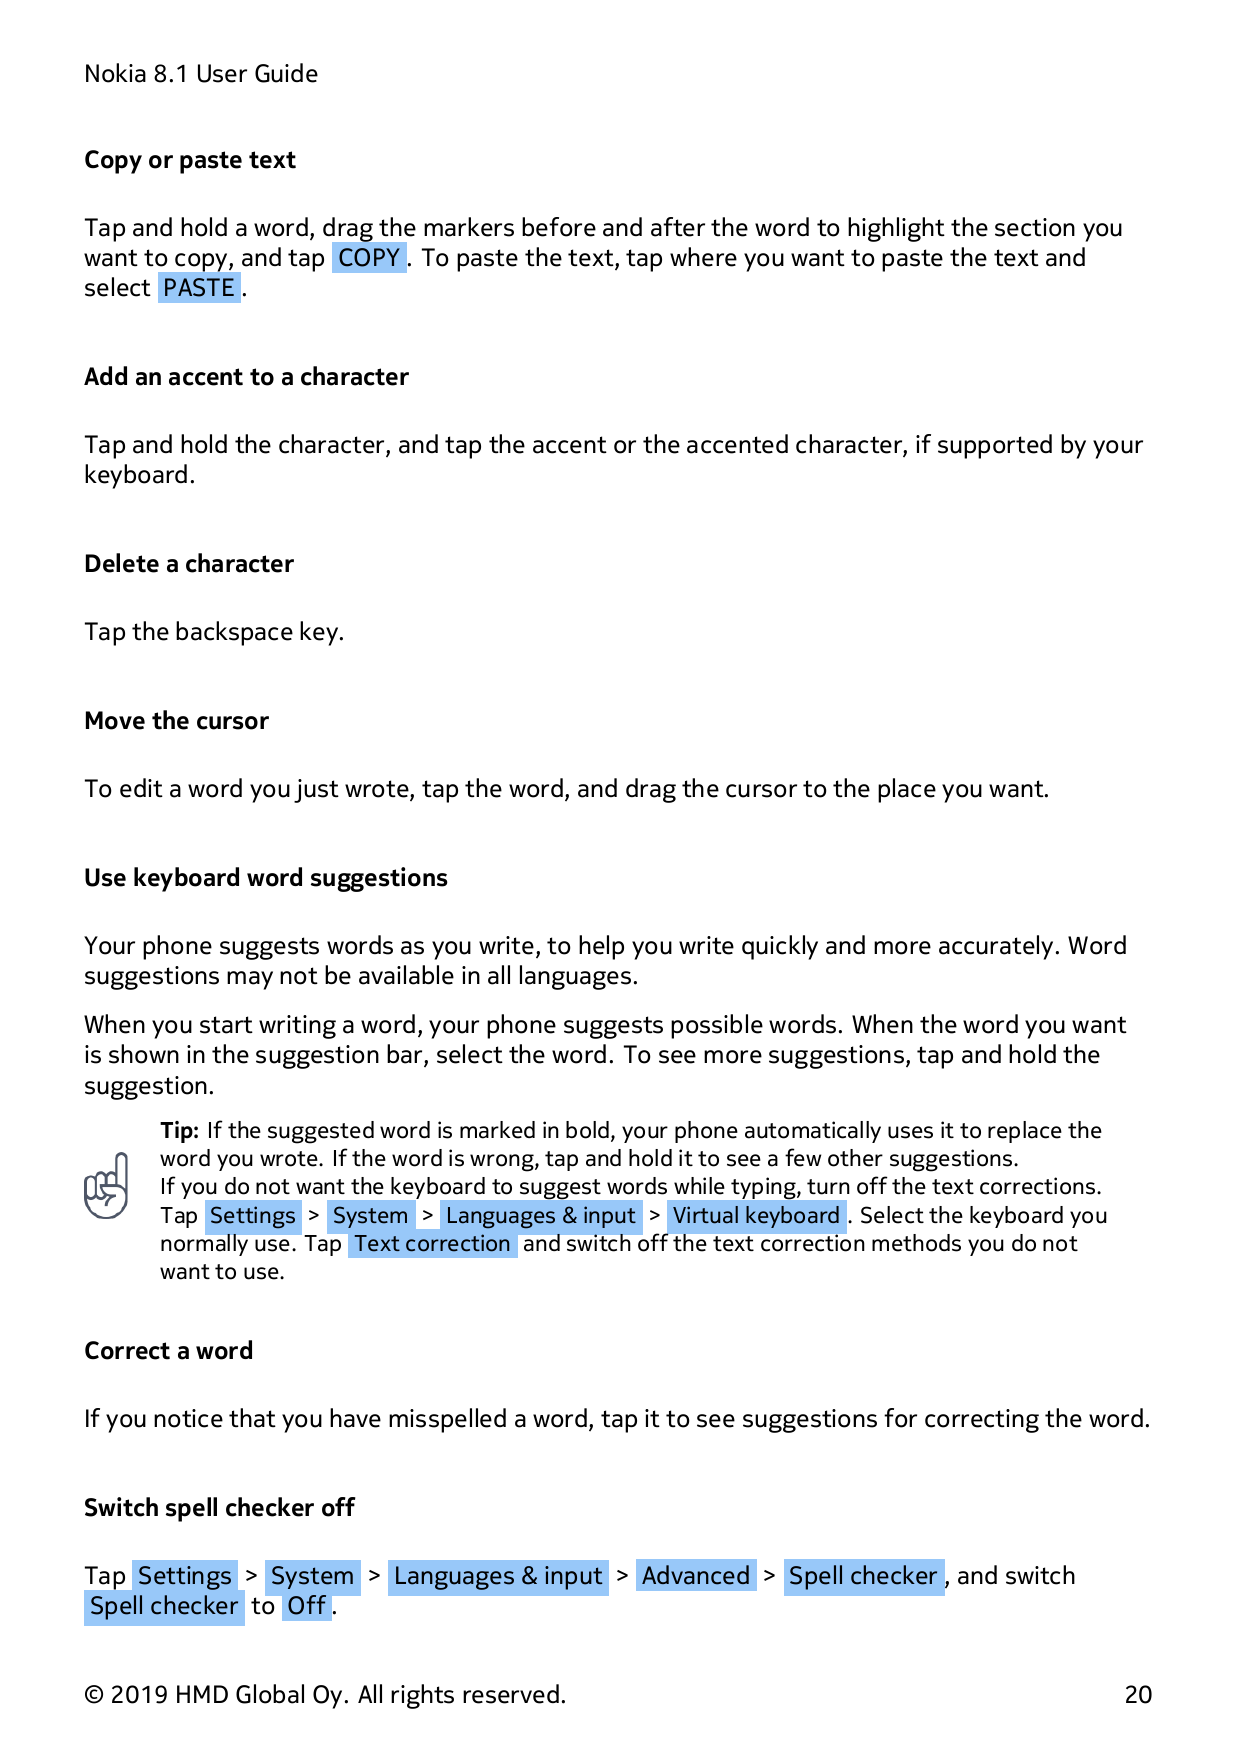 Nokia 8.1 User GuideCopy or paste textTap and hold a word, drag the markers before and after the word to highlight the section y